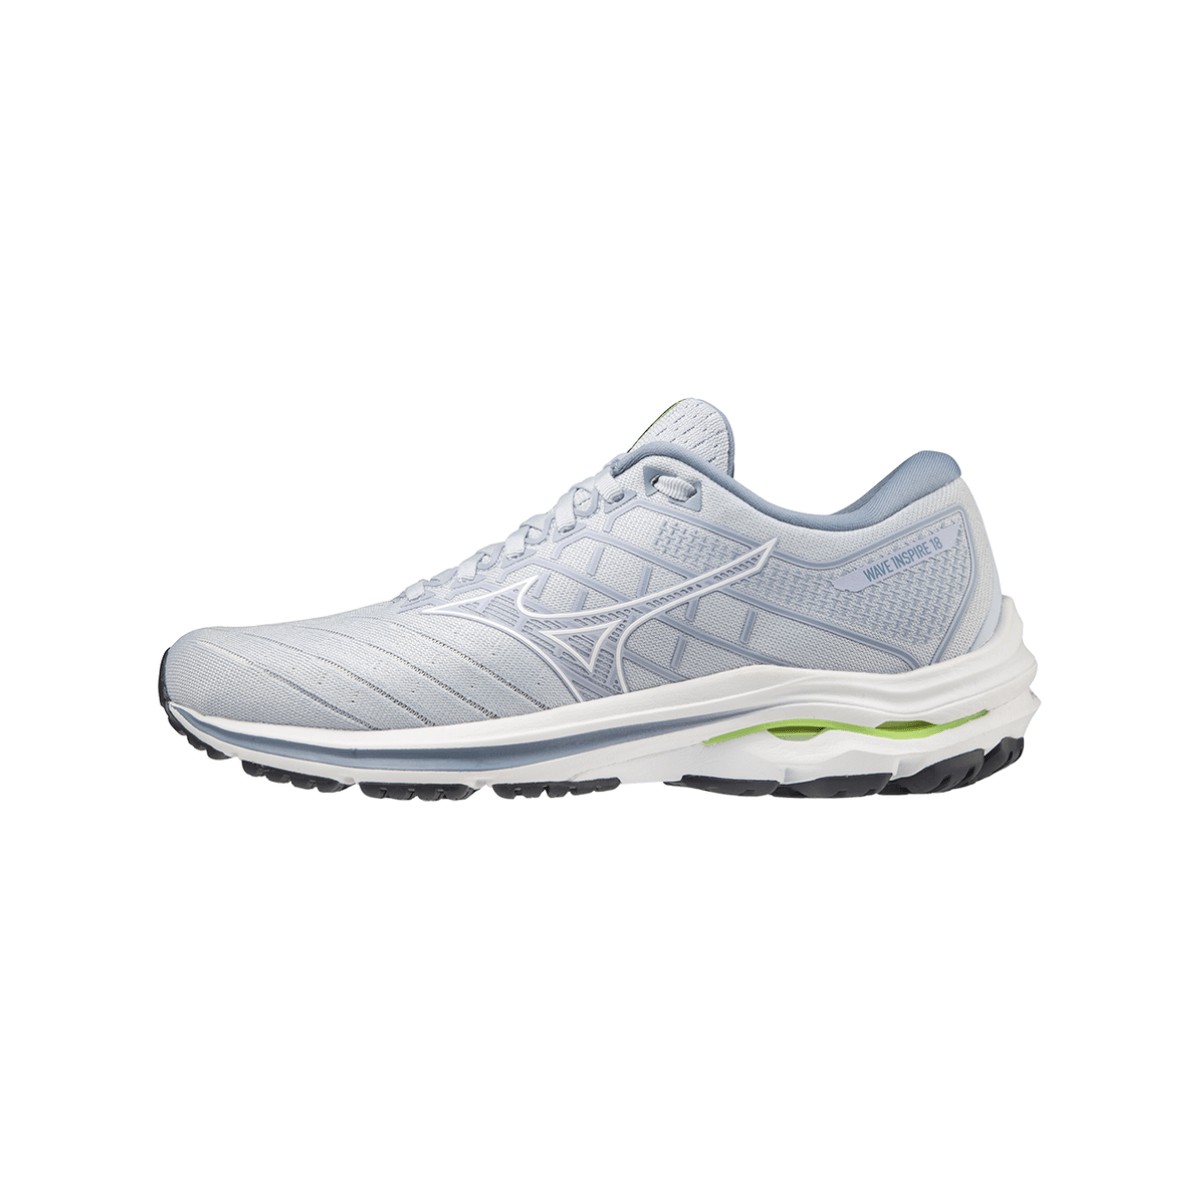 Buy Mizuno Wave Inspire 18 Shoes for Women at the Best Price